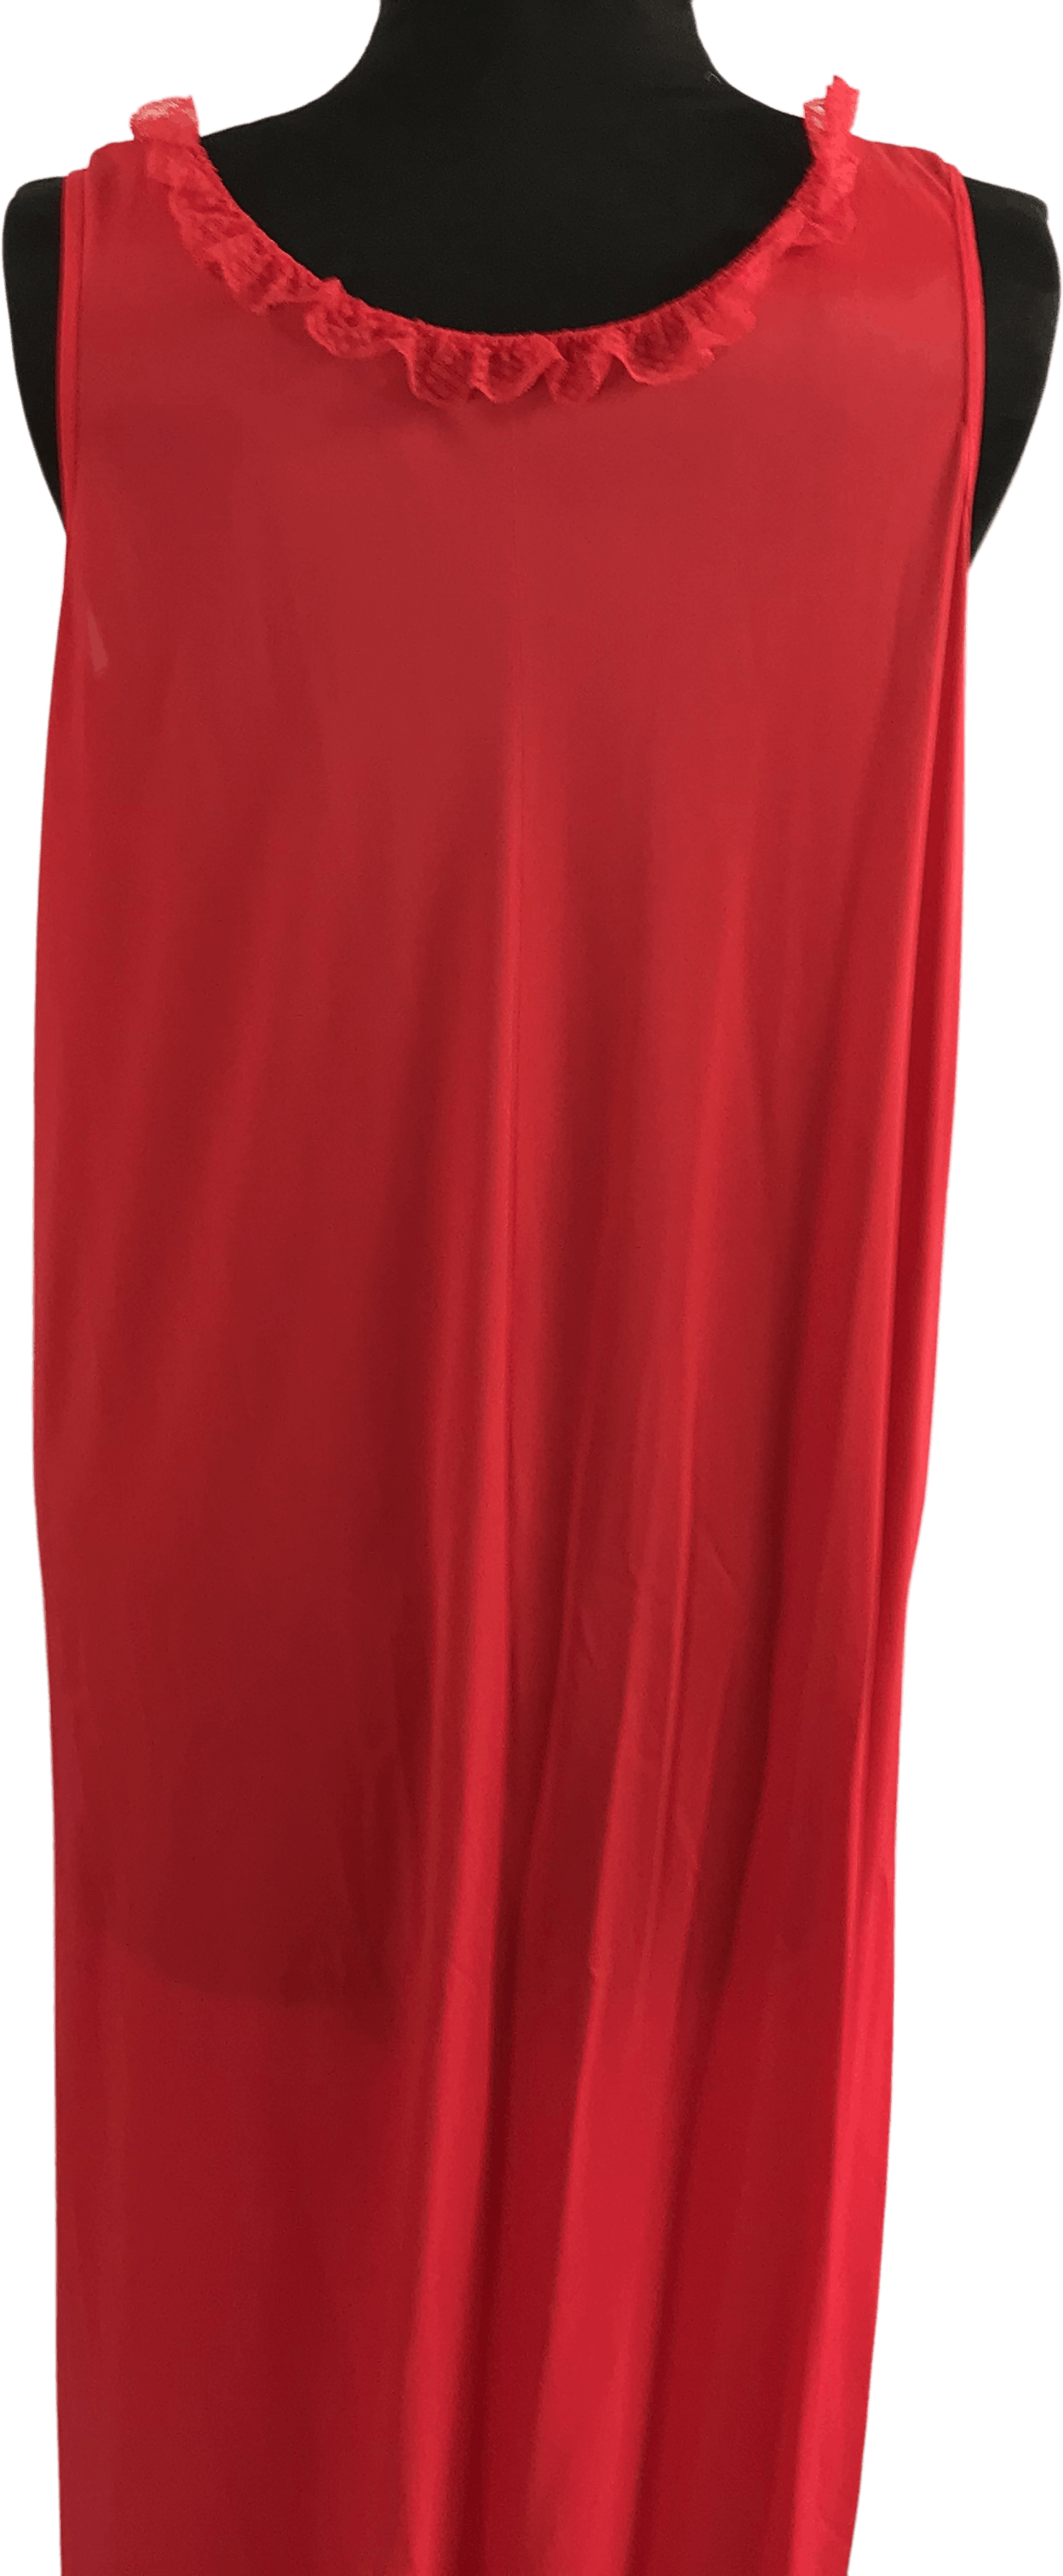 Vintage 70's Ruffle Trim Red Maxi Nightgown | Shop THRILLING